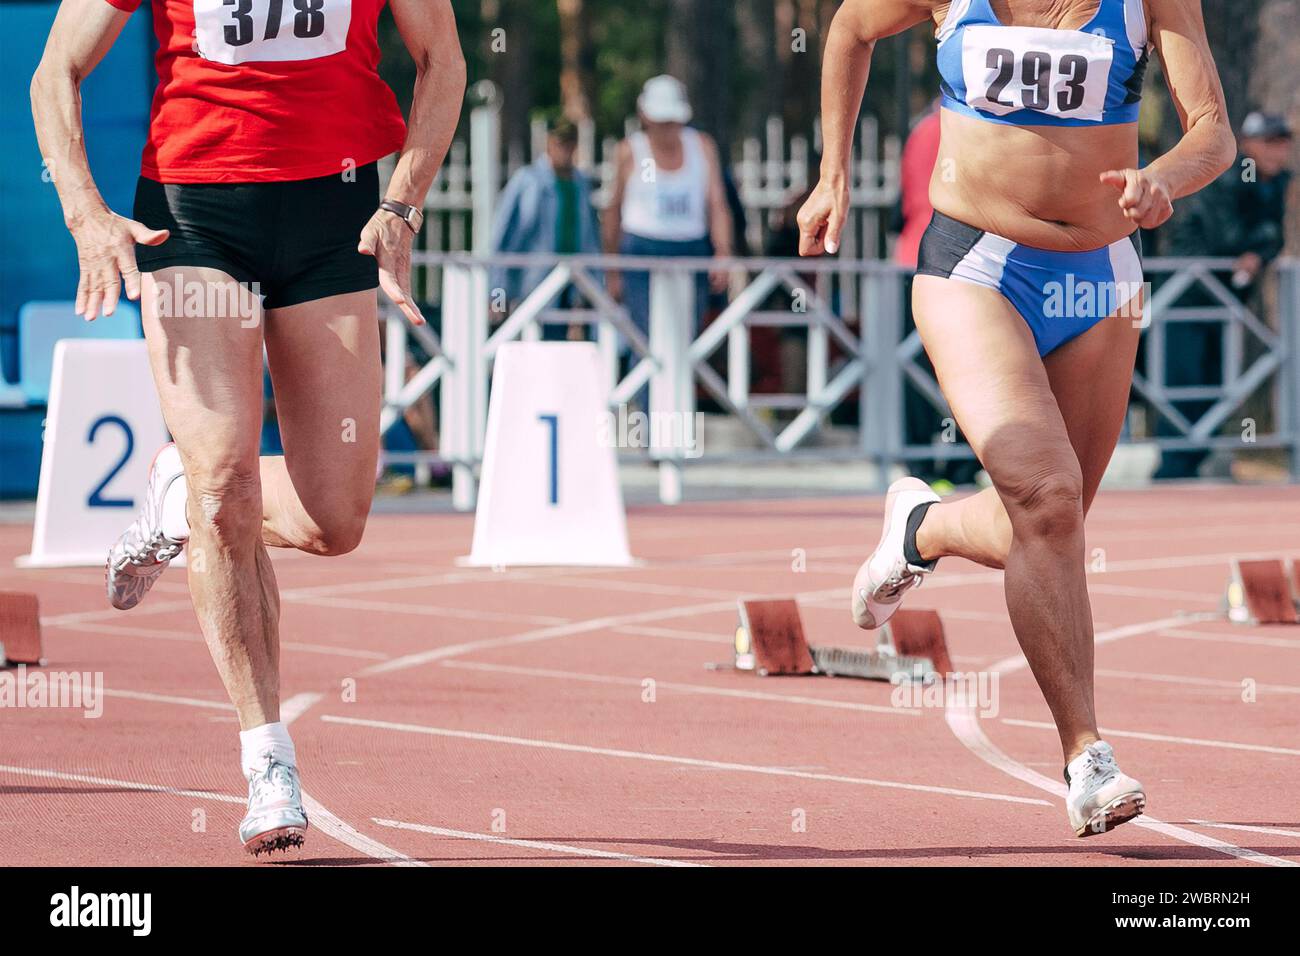 woman runners athletes 50 years old running race in masters athletics summer competition Stock Photo